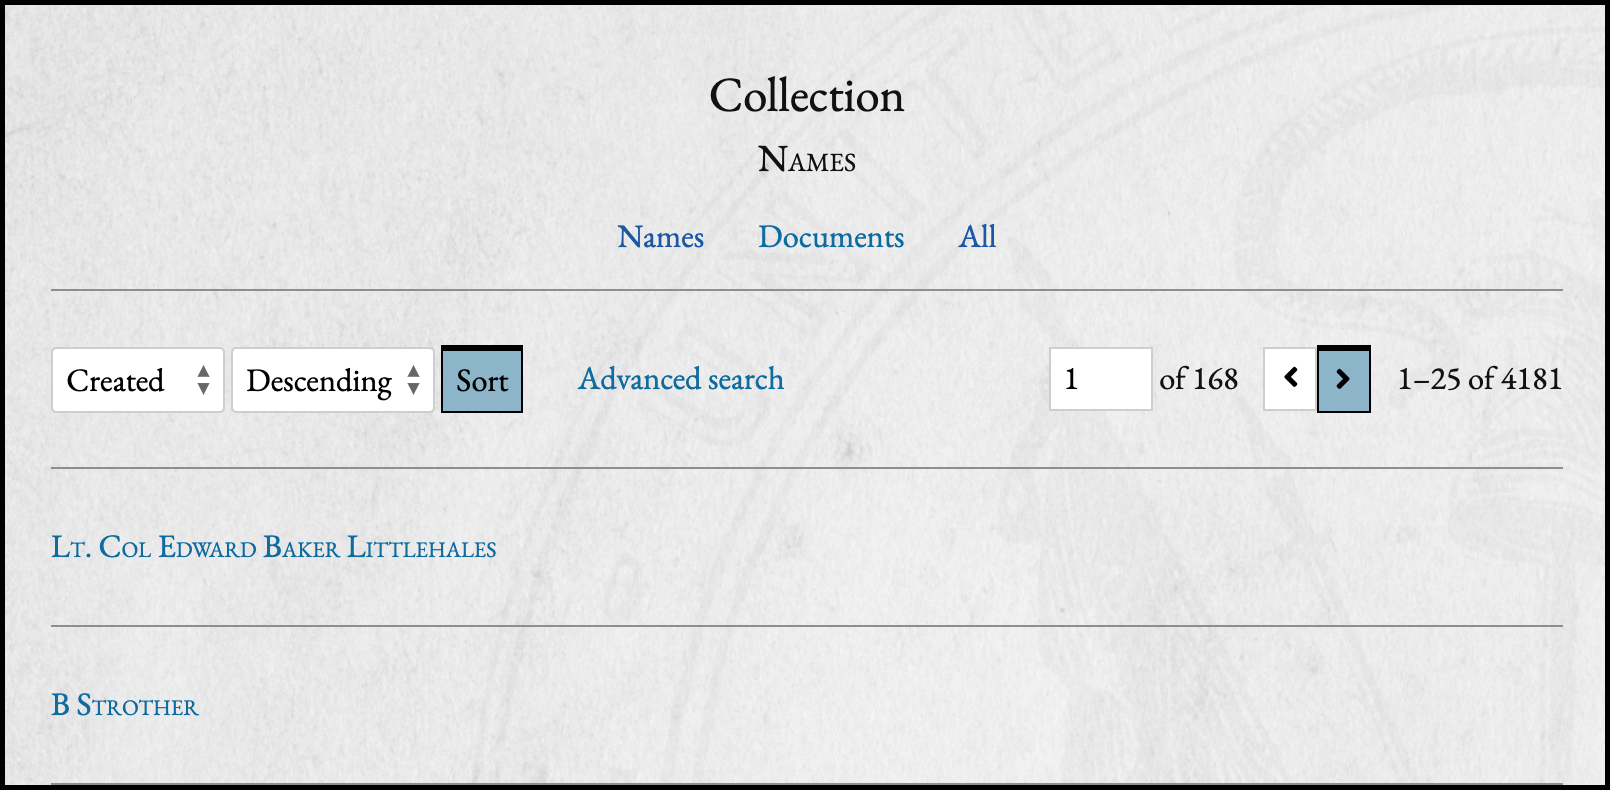 Collection page for names showing two records and the sort and pagination buttons